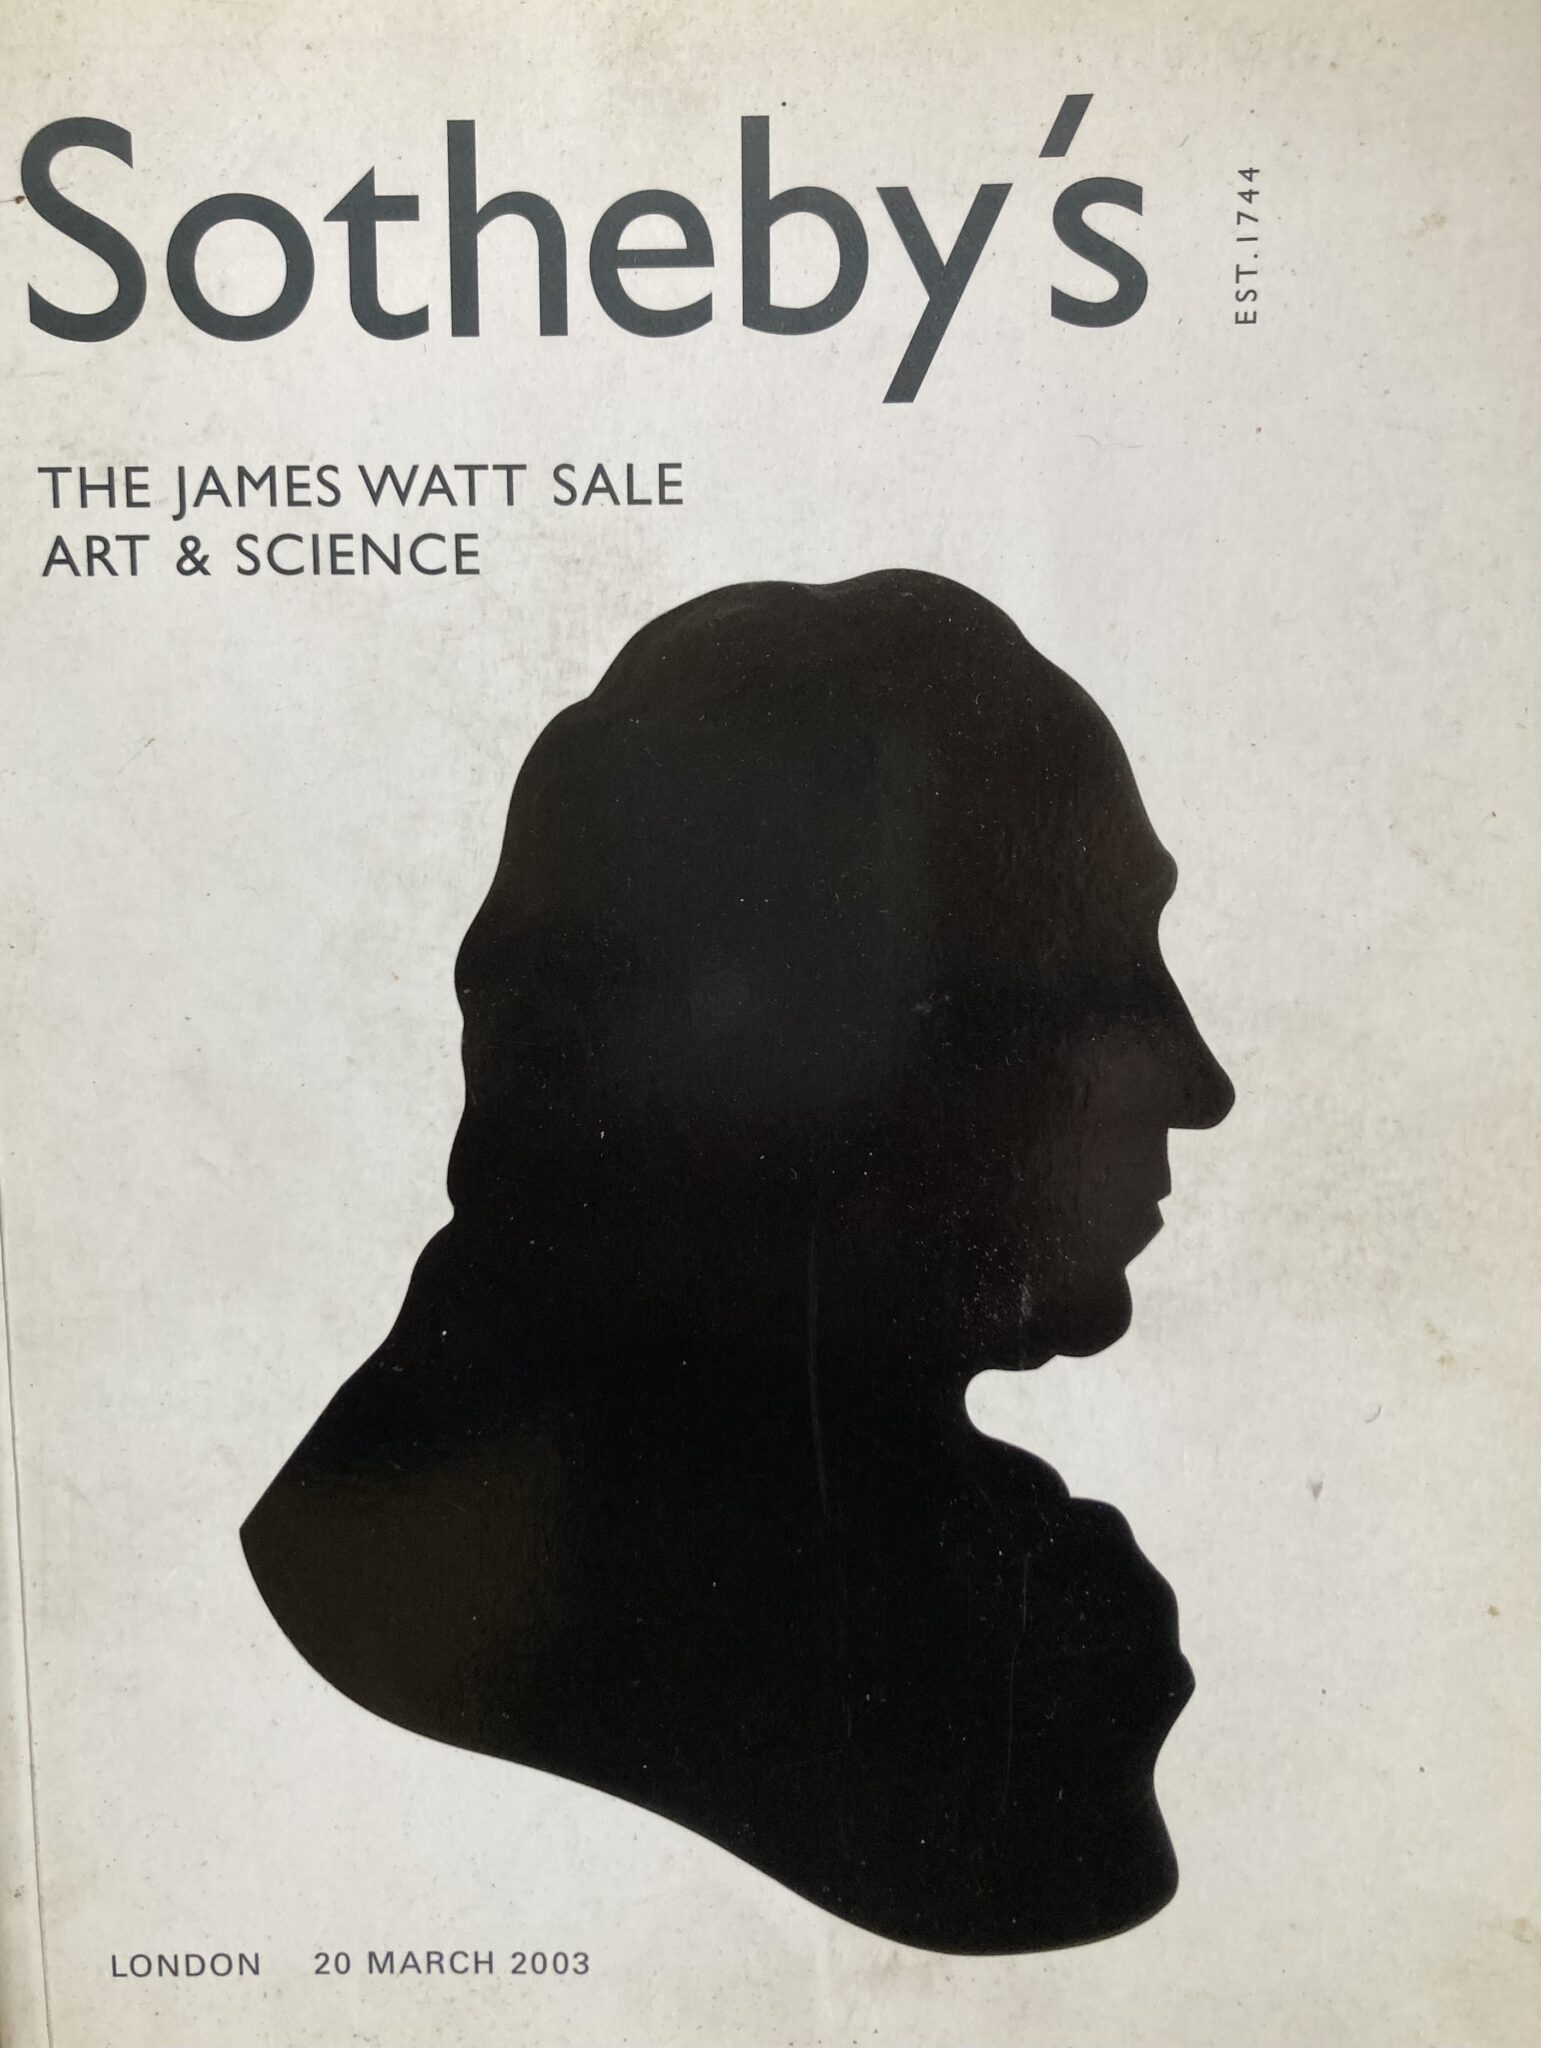 Sotheby’s Auction, 20 March 2003, The James Watt Sale, Art and Science (All Sales go to Medecins sans Frontiere Charity)